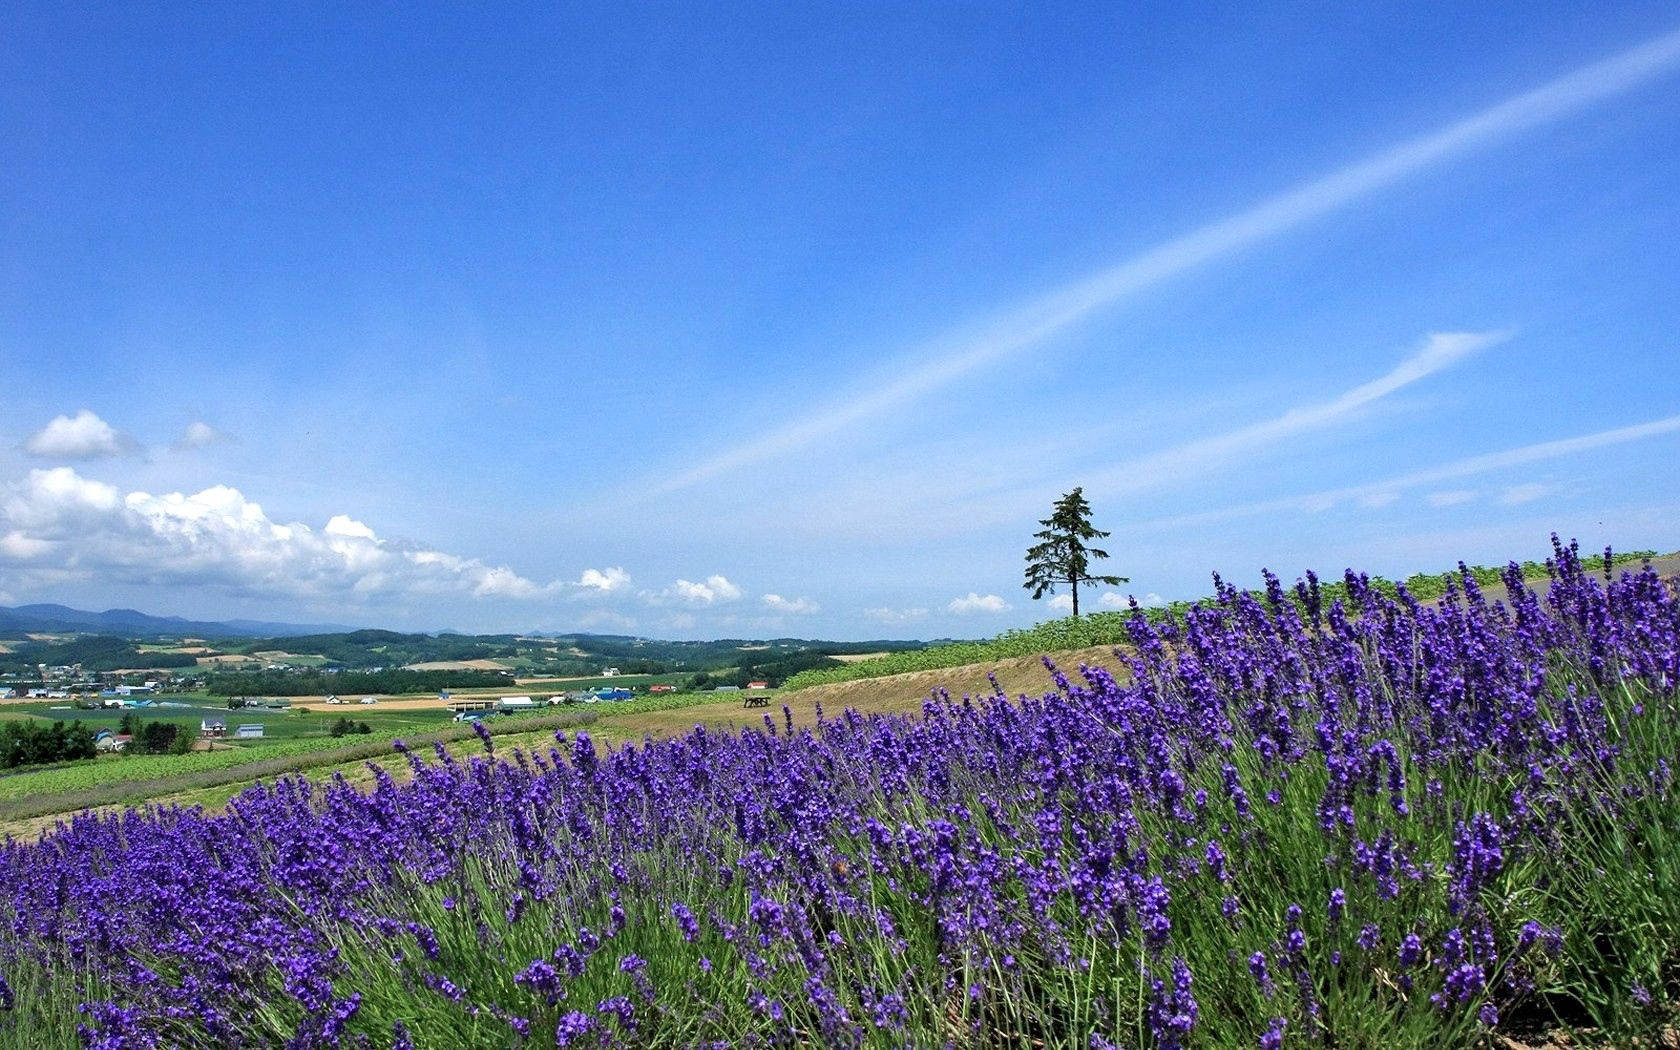 Smell The Fresh Scent Of Nature In This Lavender Field